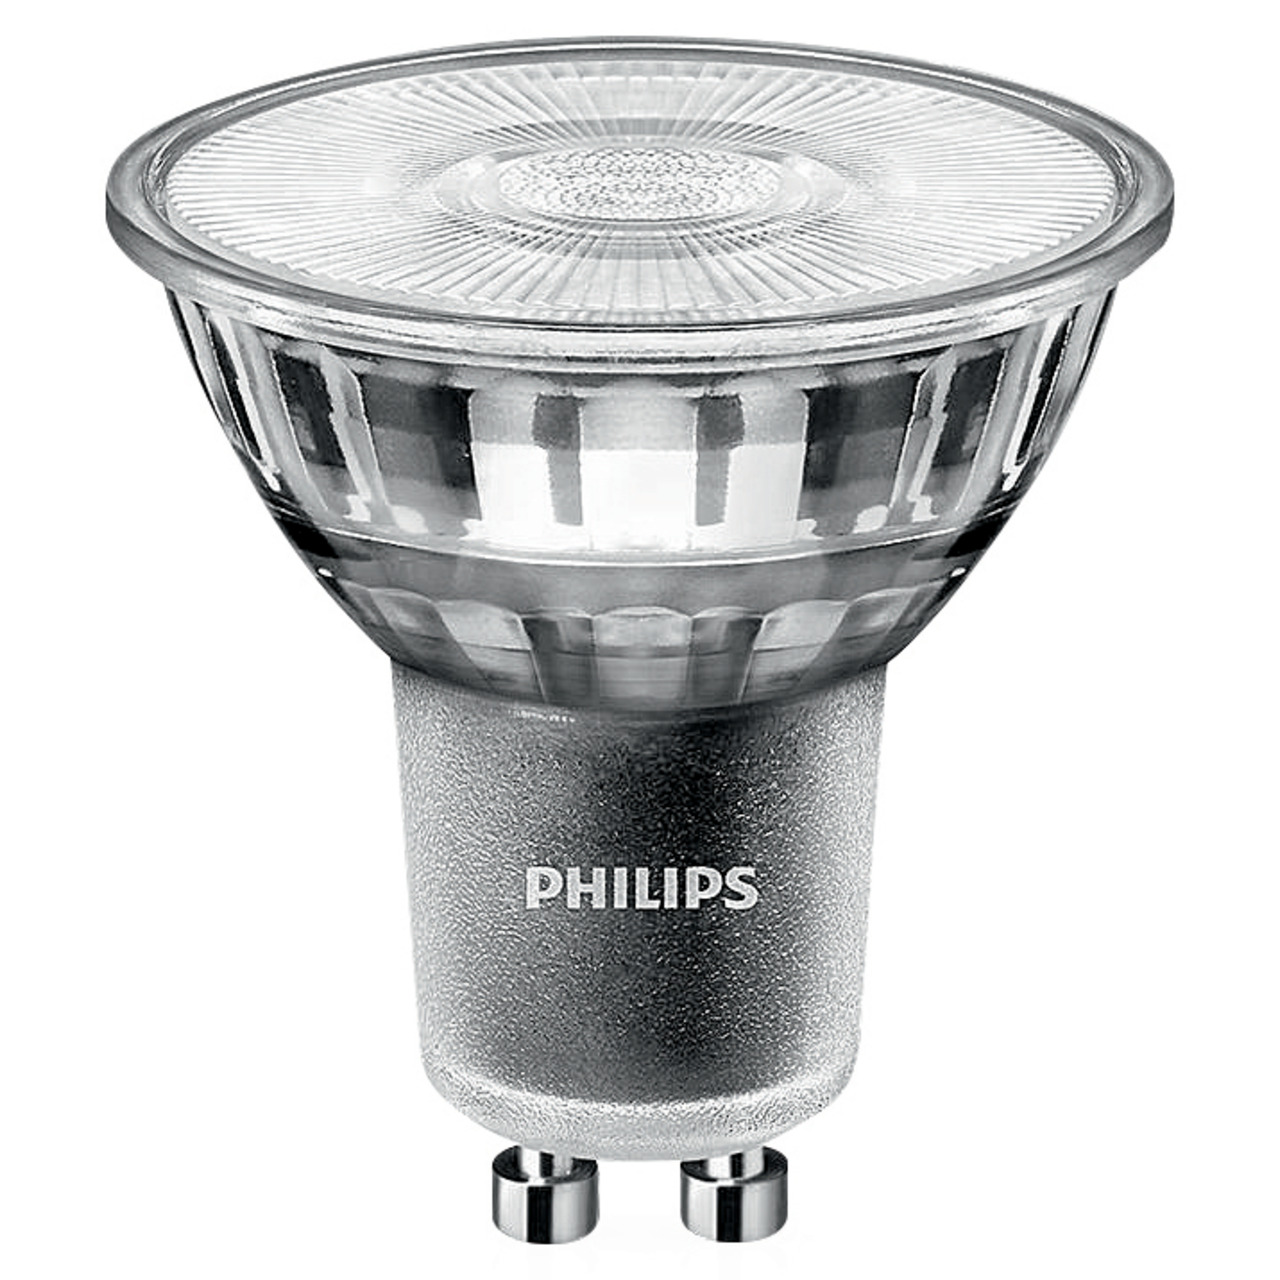 Philips MASTER ExpertColor 5-5-W-GU10-LED-Lampe- 97 Ra- 2700K- warmweiss- dimmbar